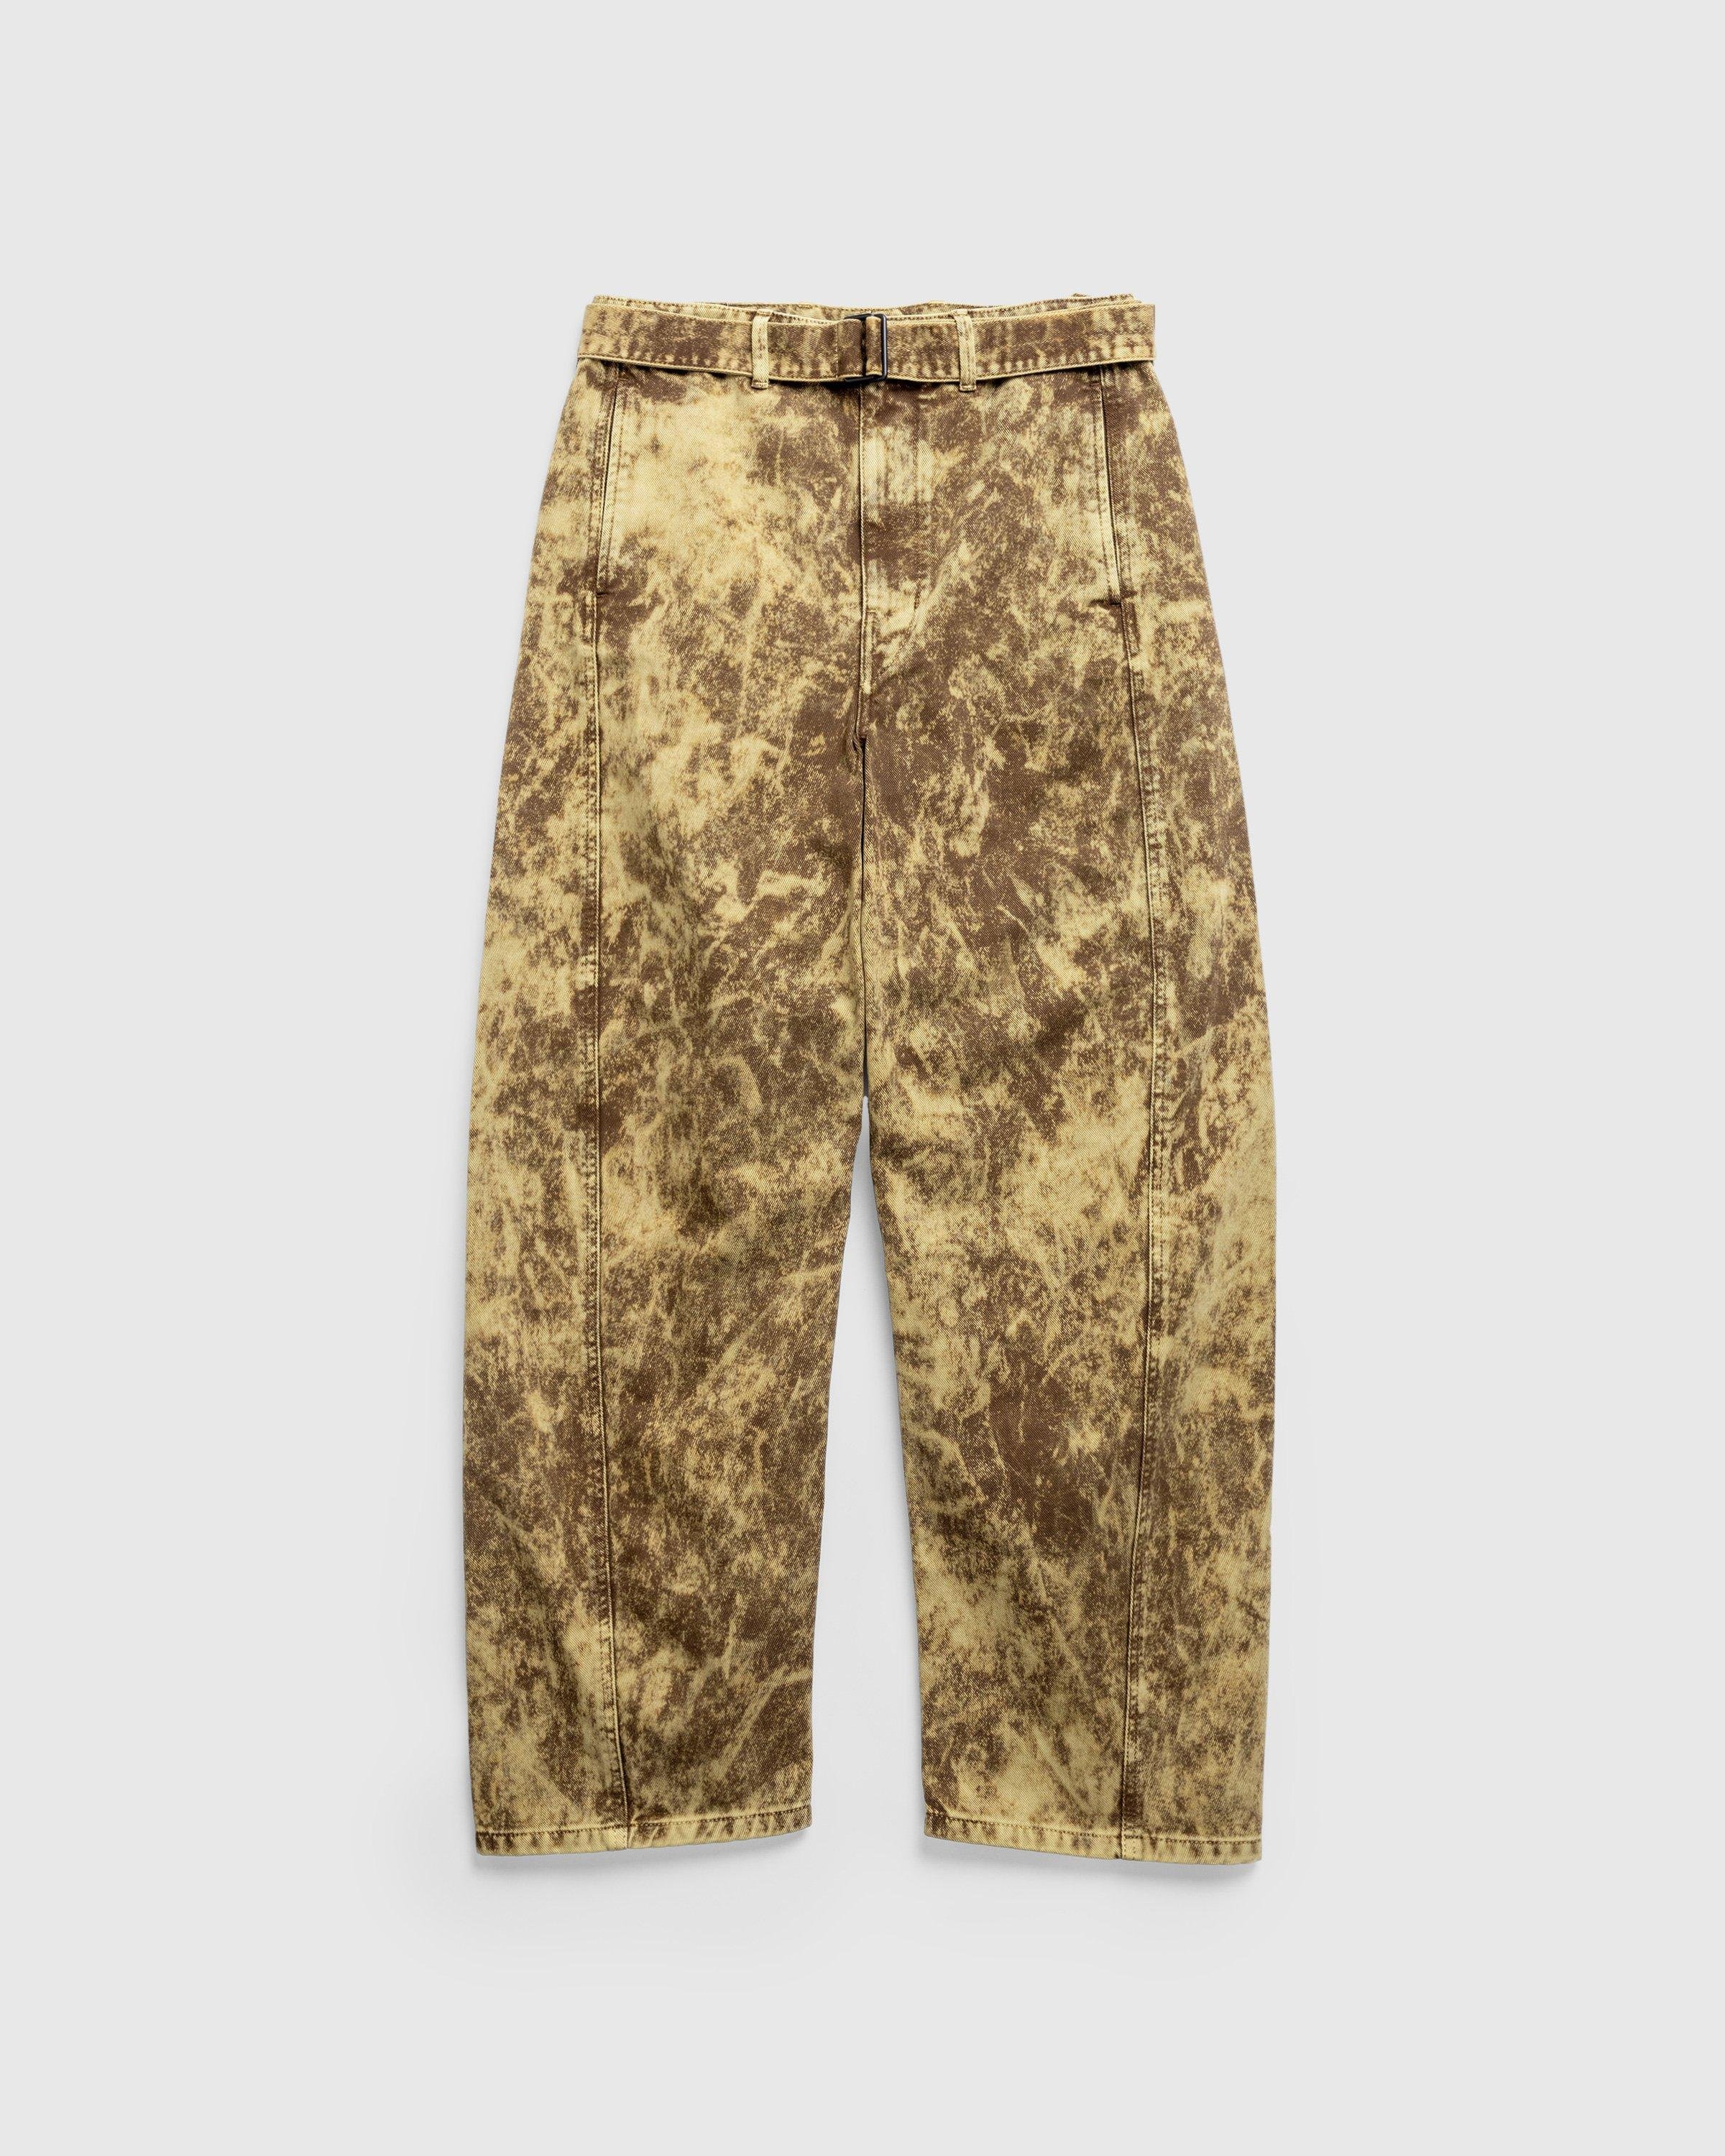 LemaireTwisted Belted Pants Denim Acid Snow Bronze by HIGHSNOBIETY